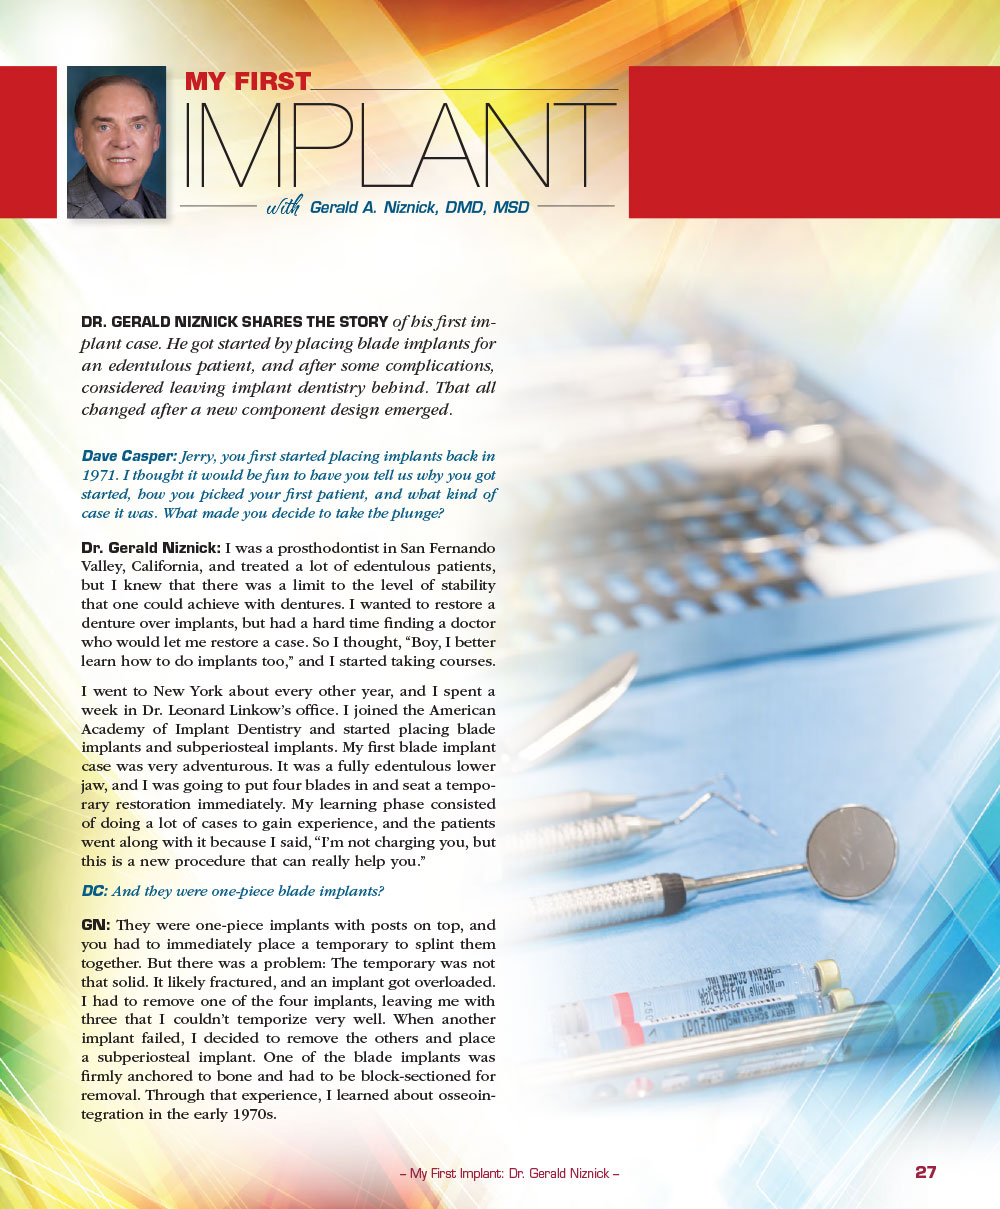 My First Implant with Gerald A. Niznick, DMD, MSD